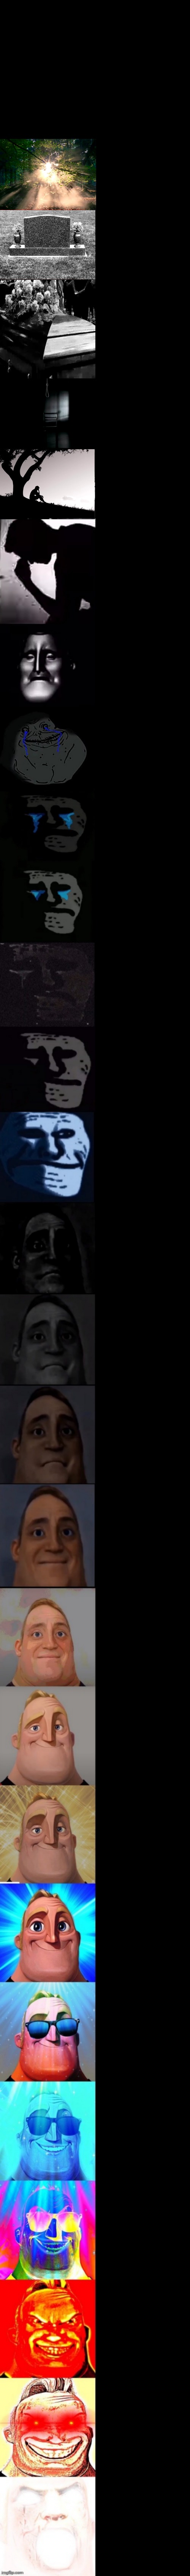 High Quality Mr. Incredible becoming sad to canny even more extended Blank Meme Template